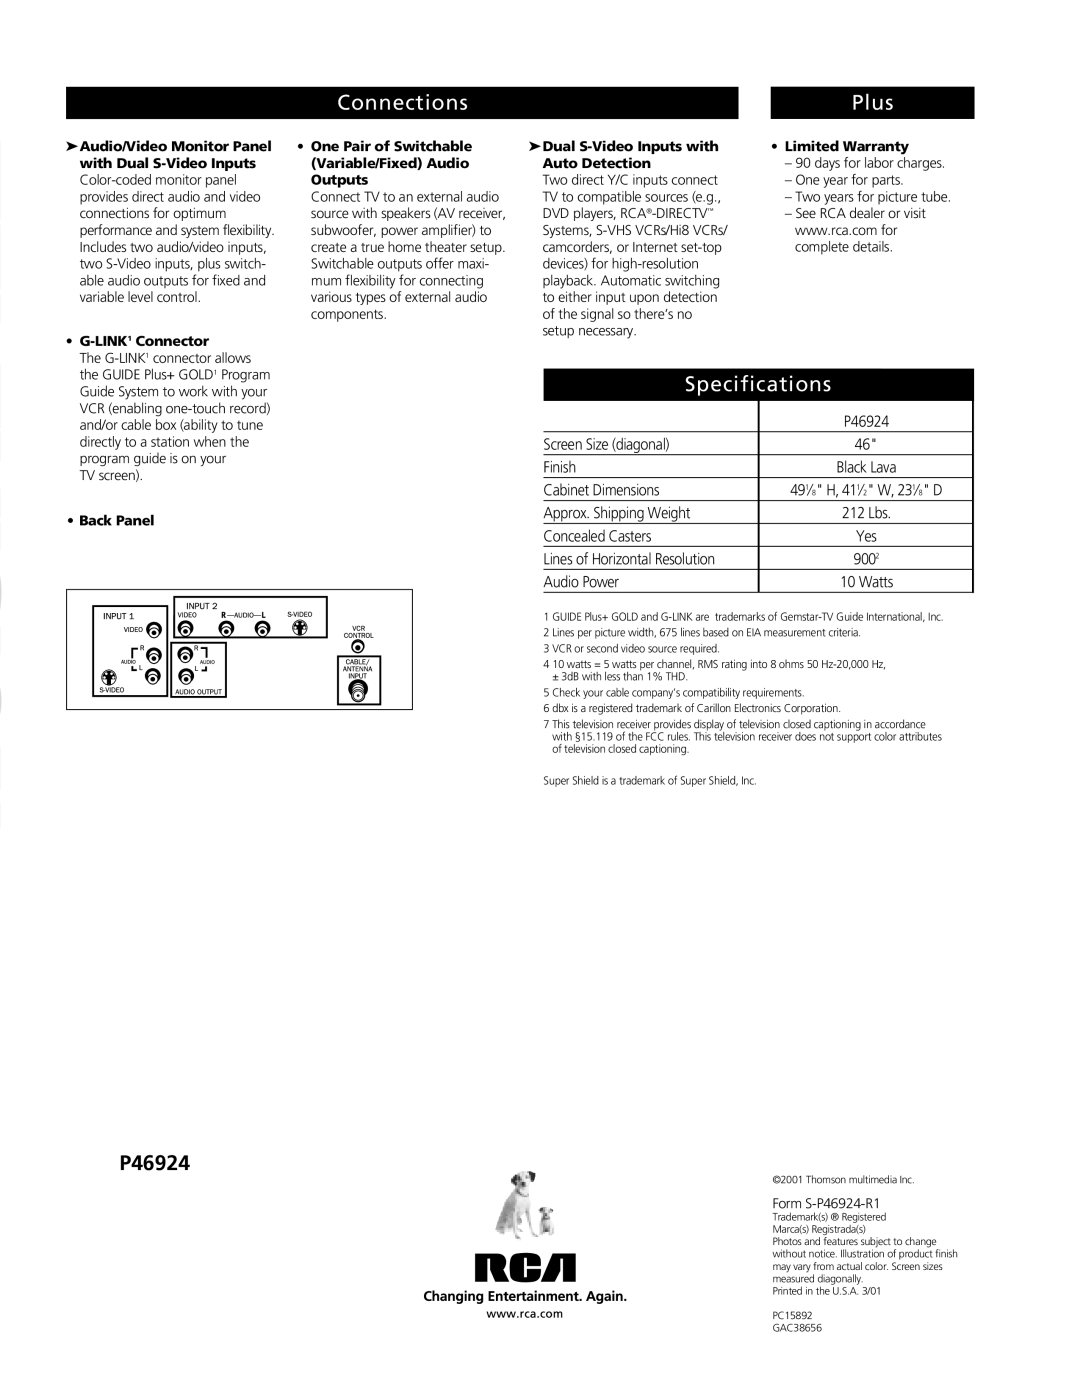 RCA P46924 Connections, Plus, Specifications, Screen Size diagonal, Finish, Cabinet Dimensions, Approx. Shipping Weight 